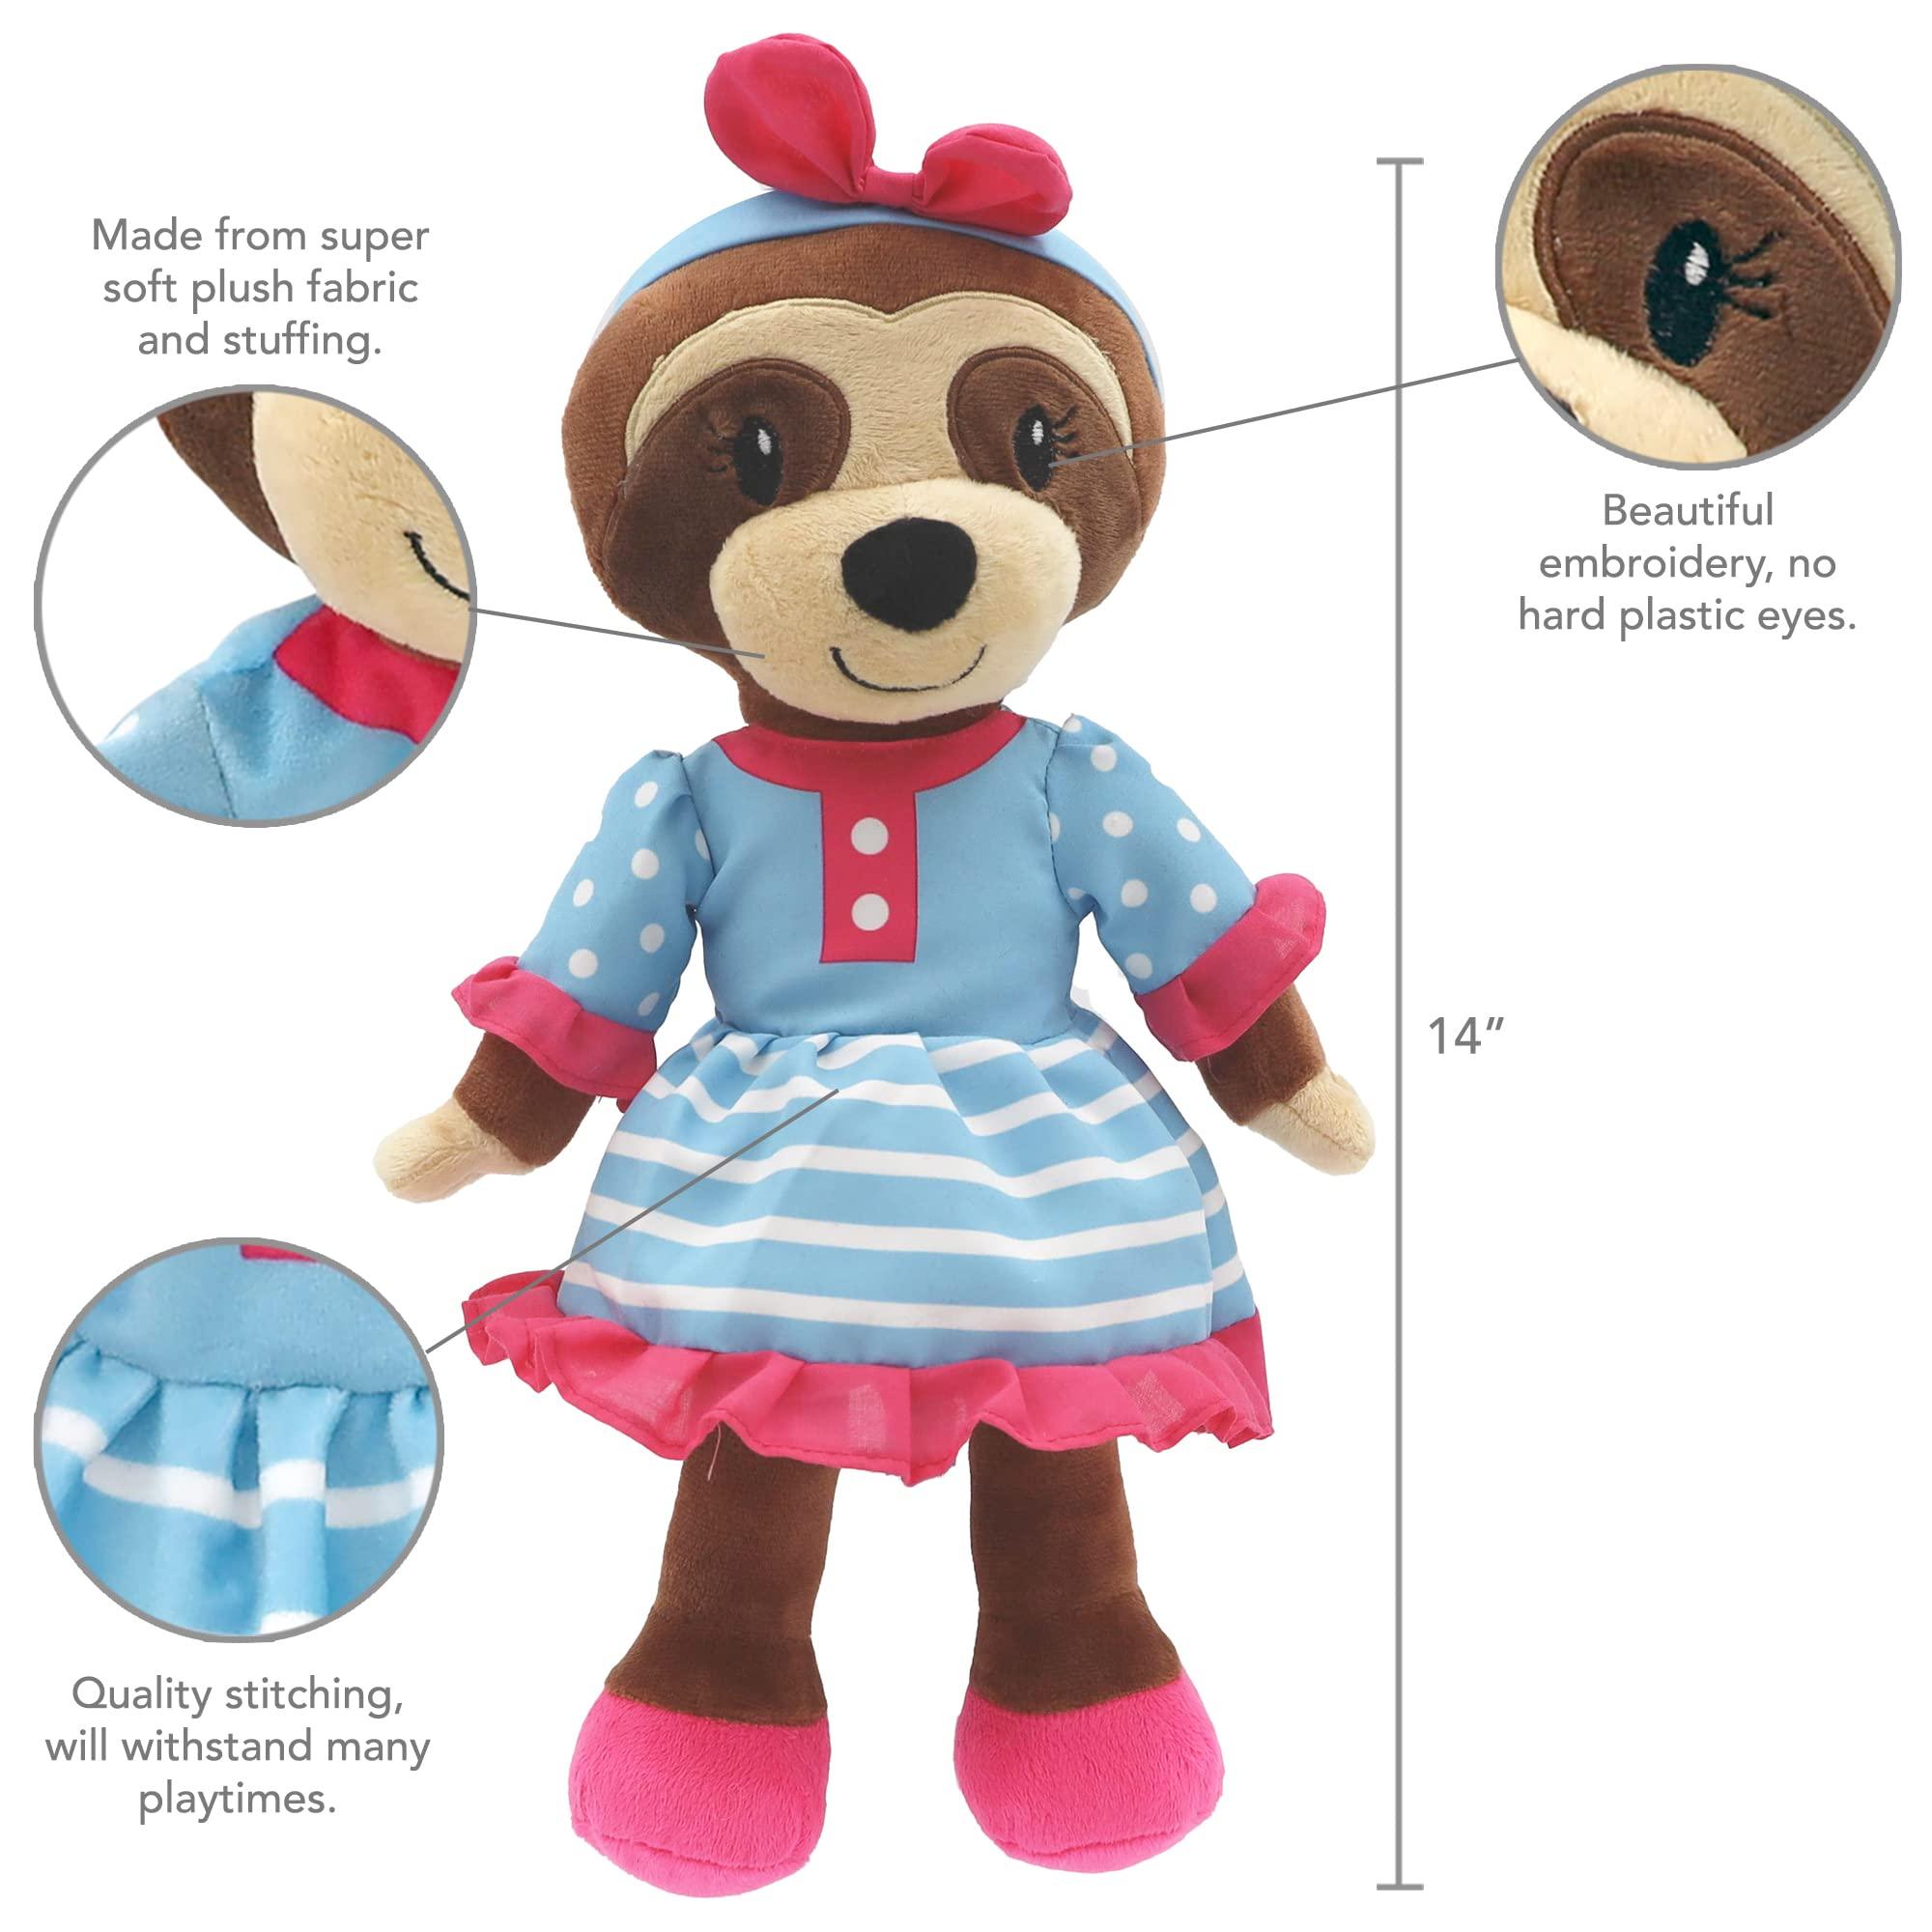 Sharewood Forest Friends 14 Inch Rag Doll Sofie the Sloth - OrangeOnions Wholesale